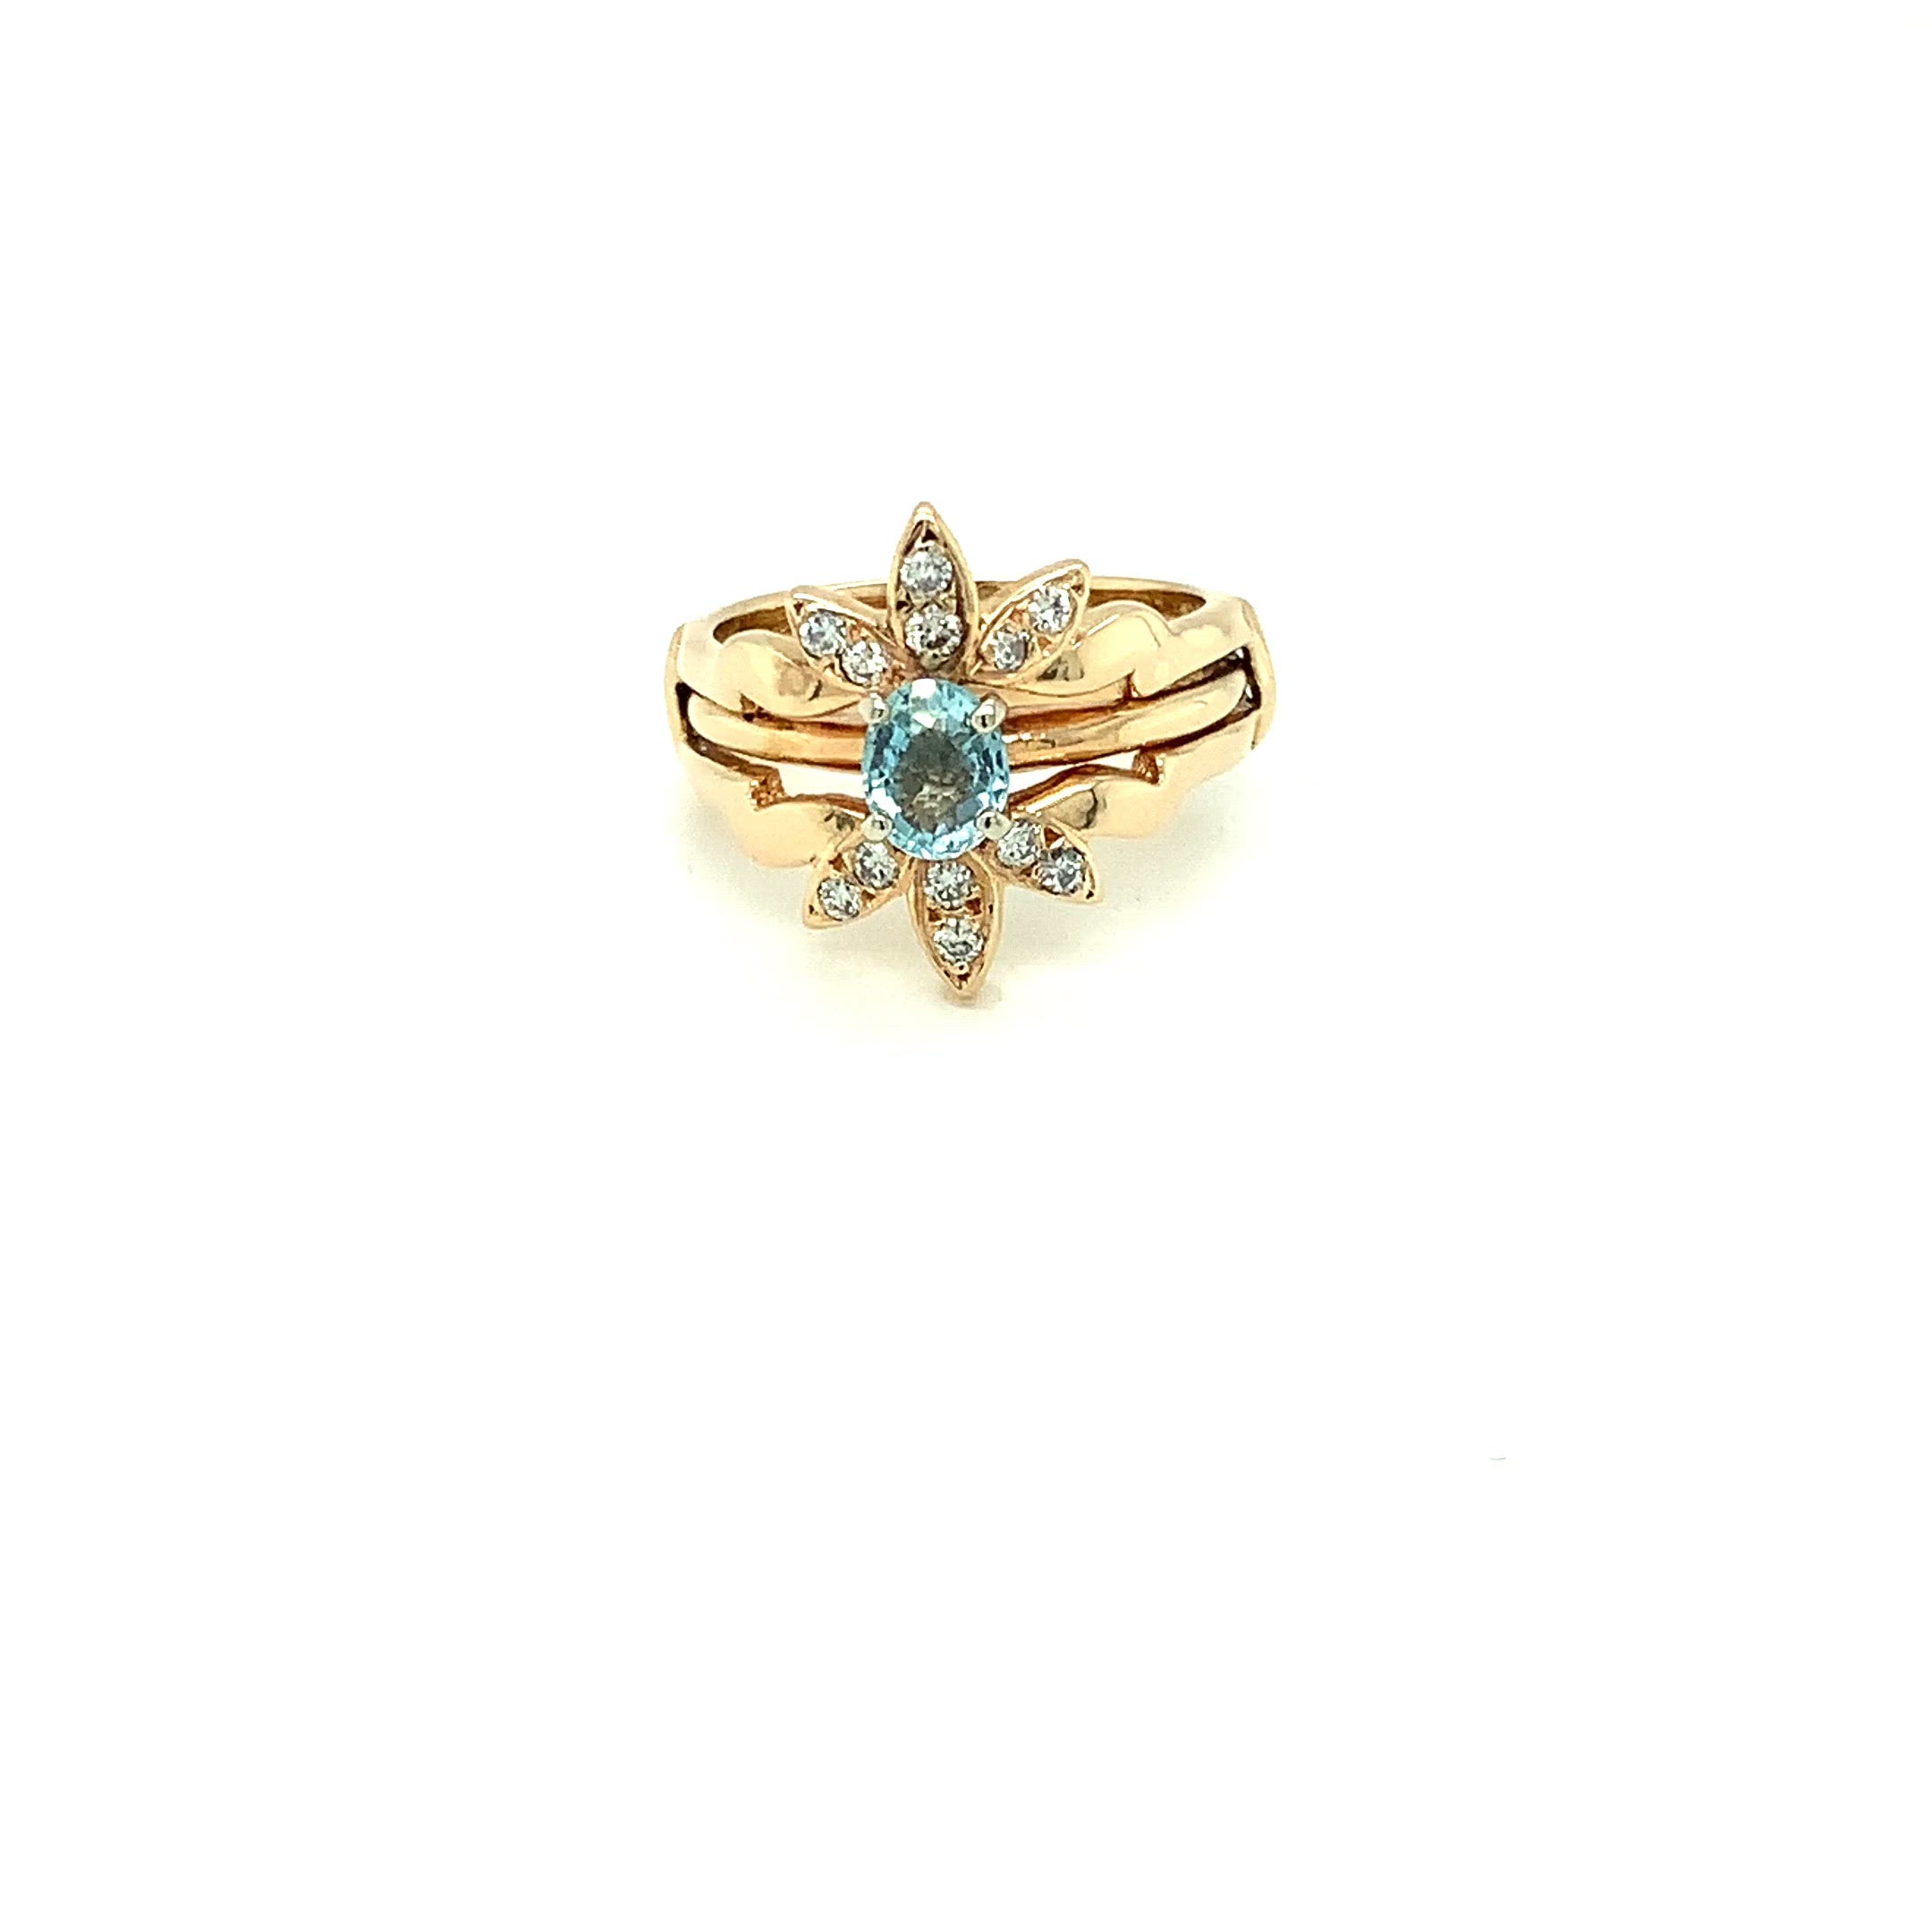 Natural Paraiba Tourmaline & Diamond Ring 14K Solid Gold .85tcw Women's Fine Ring Cluster Ring Cocktail Ring Estate Jewelry Fine Jewellery